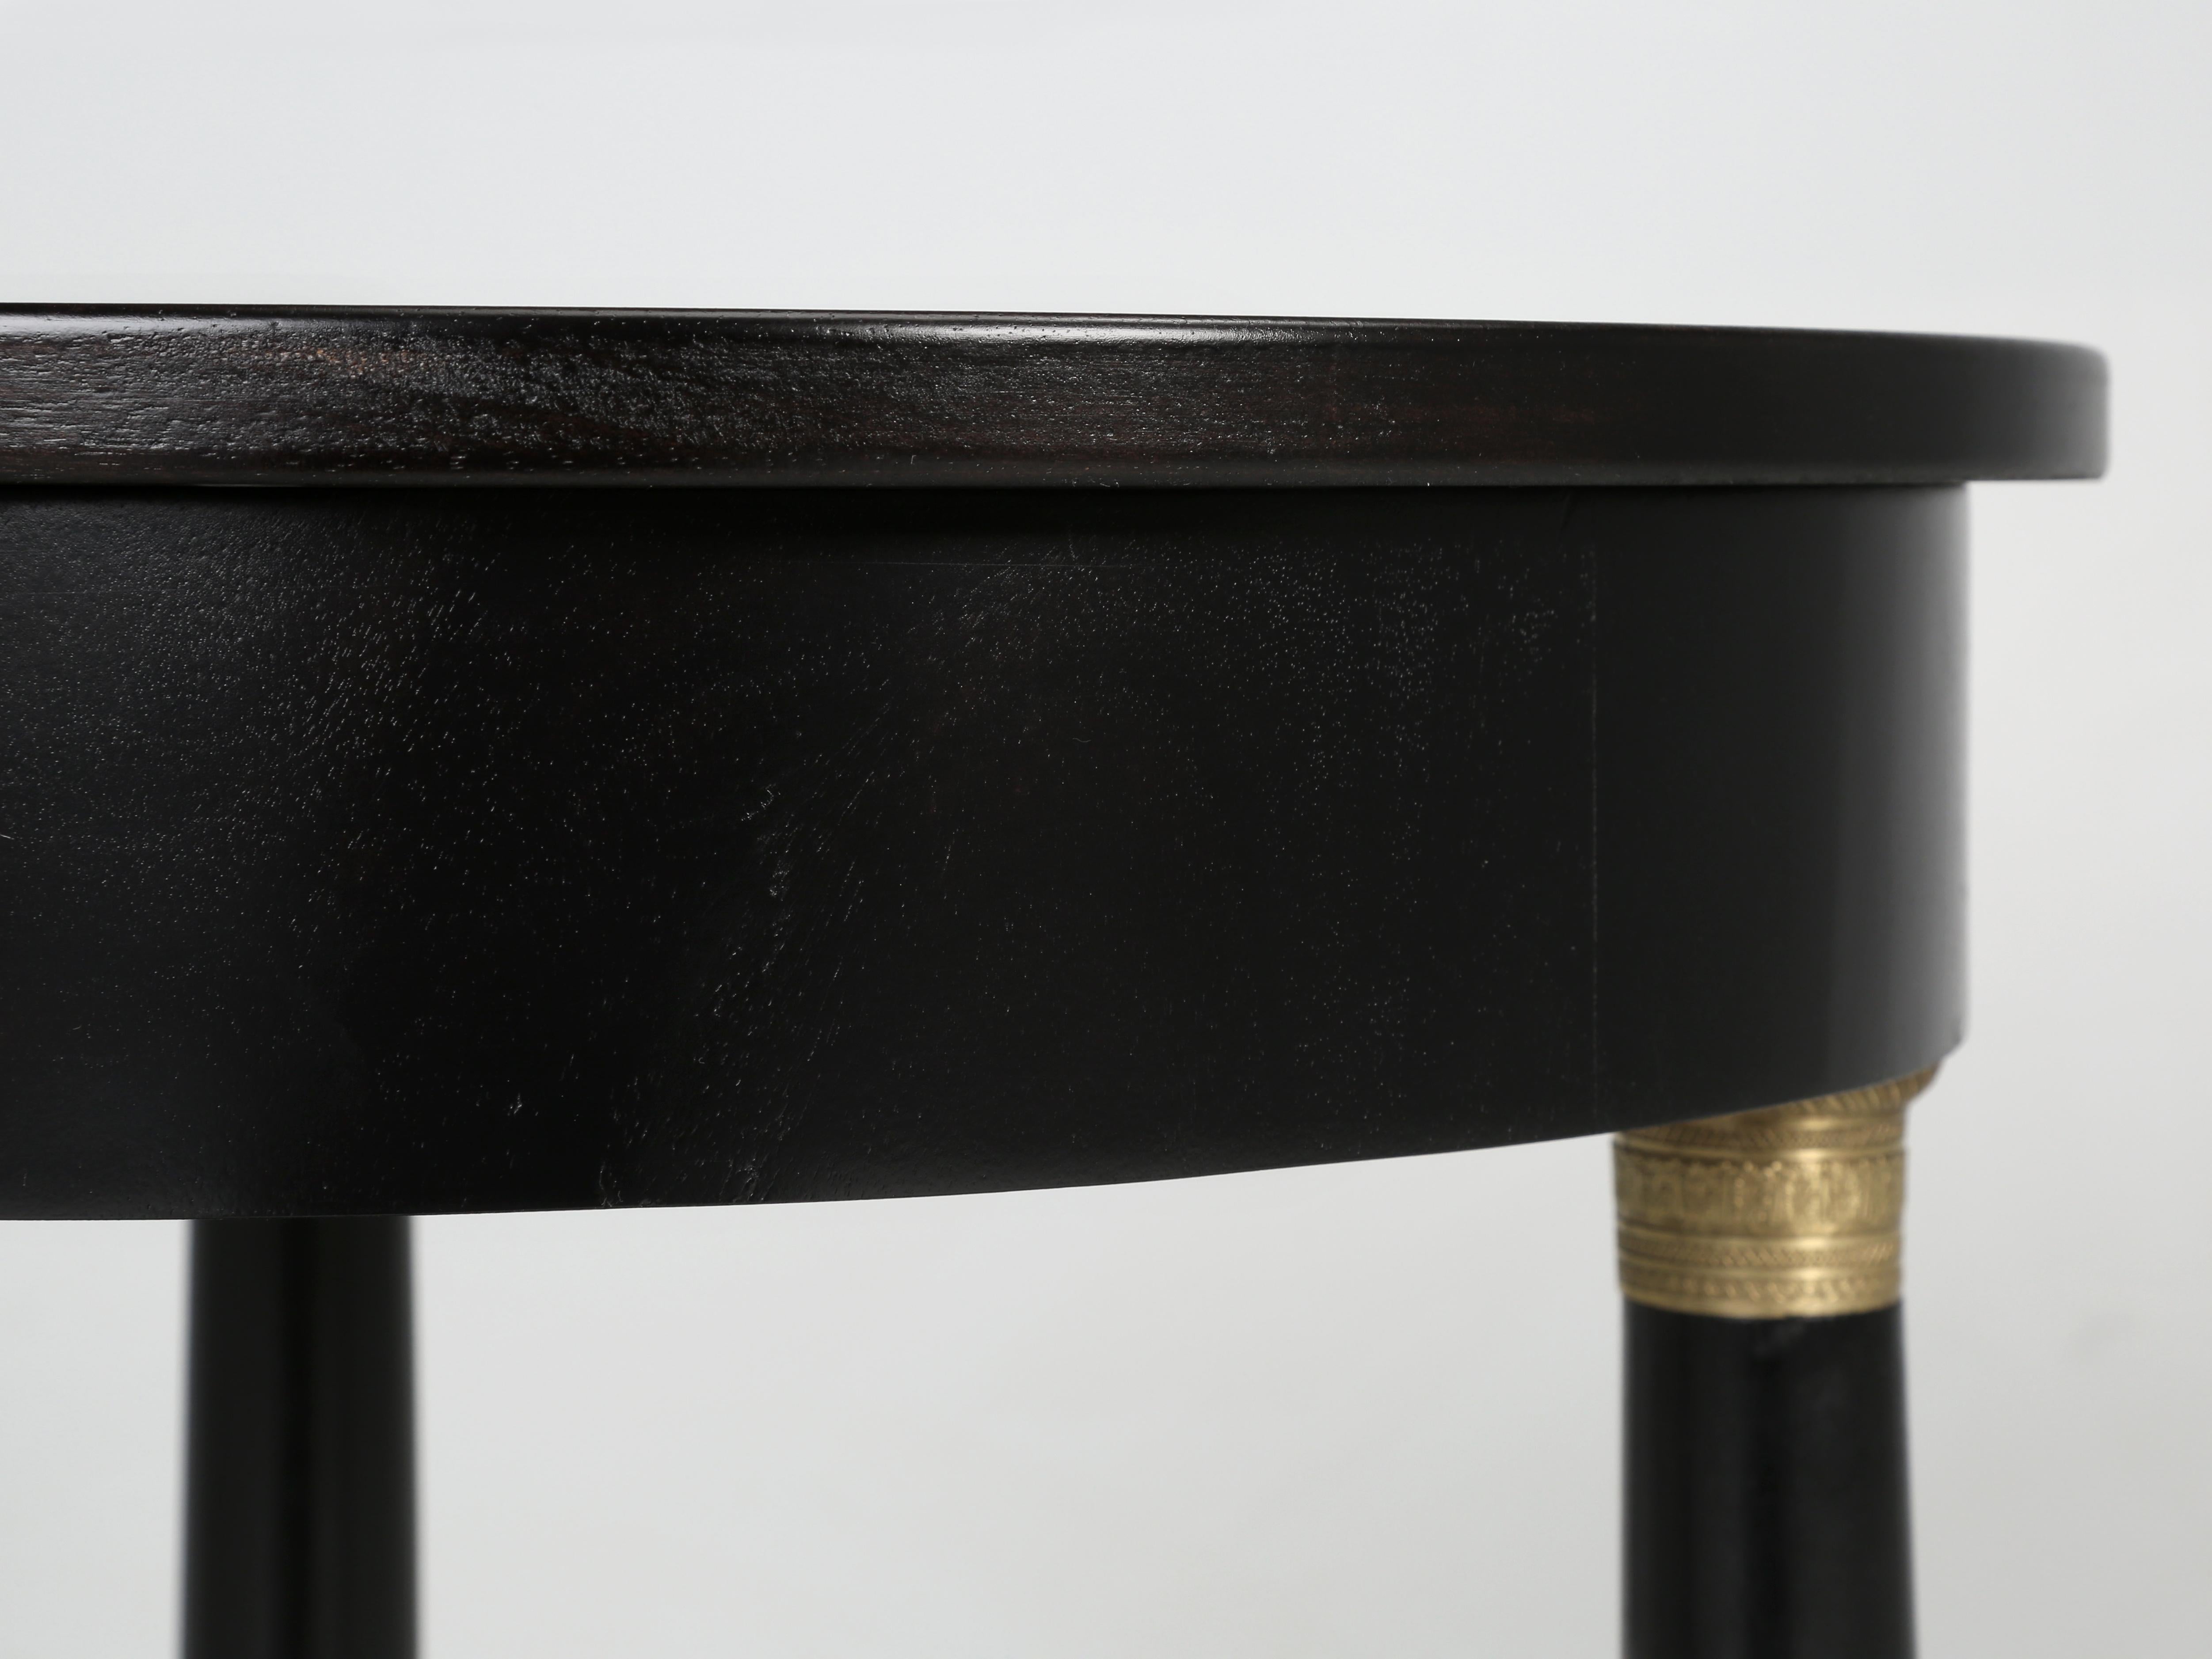 Brass Vintage French Empire Style Side Table in an Ebonized Mahogany Finish, Restored  For Sale